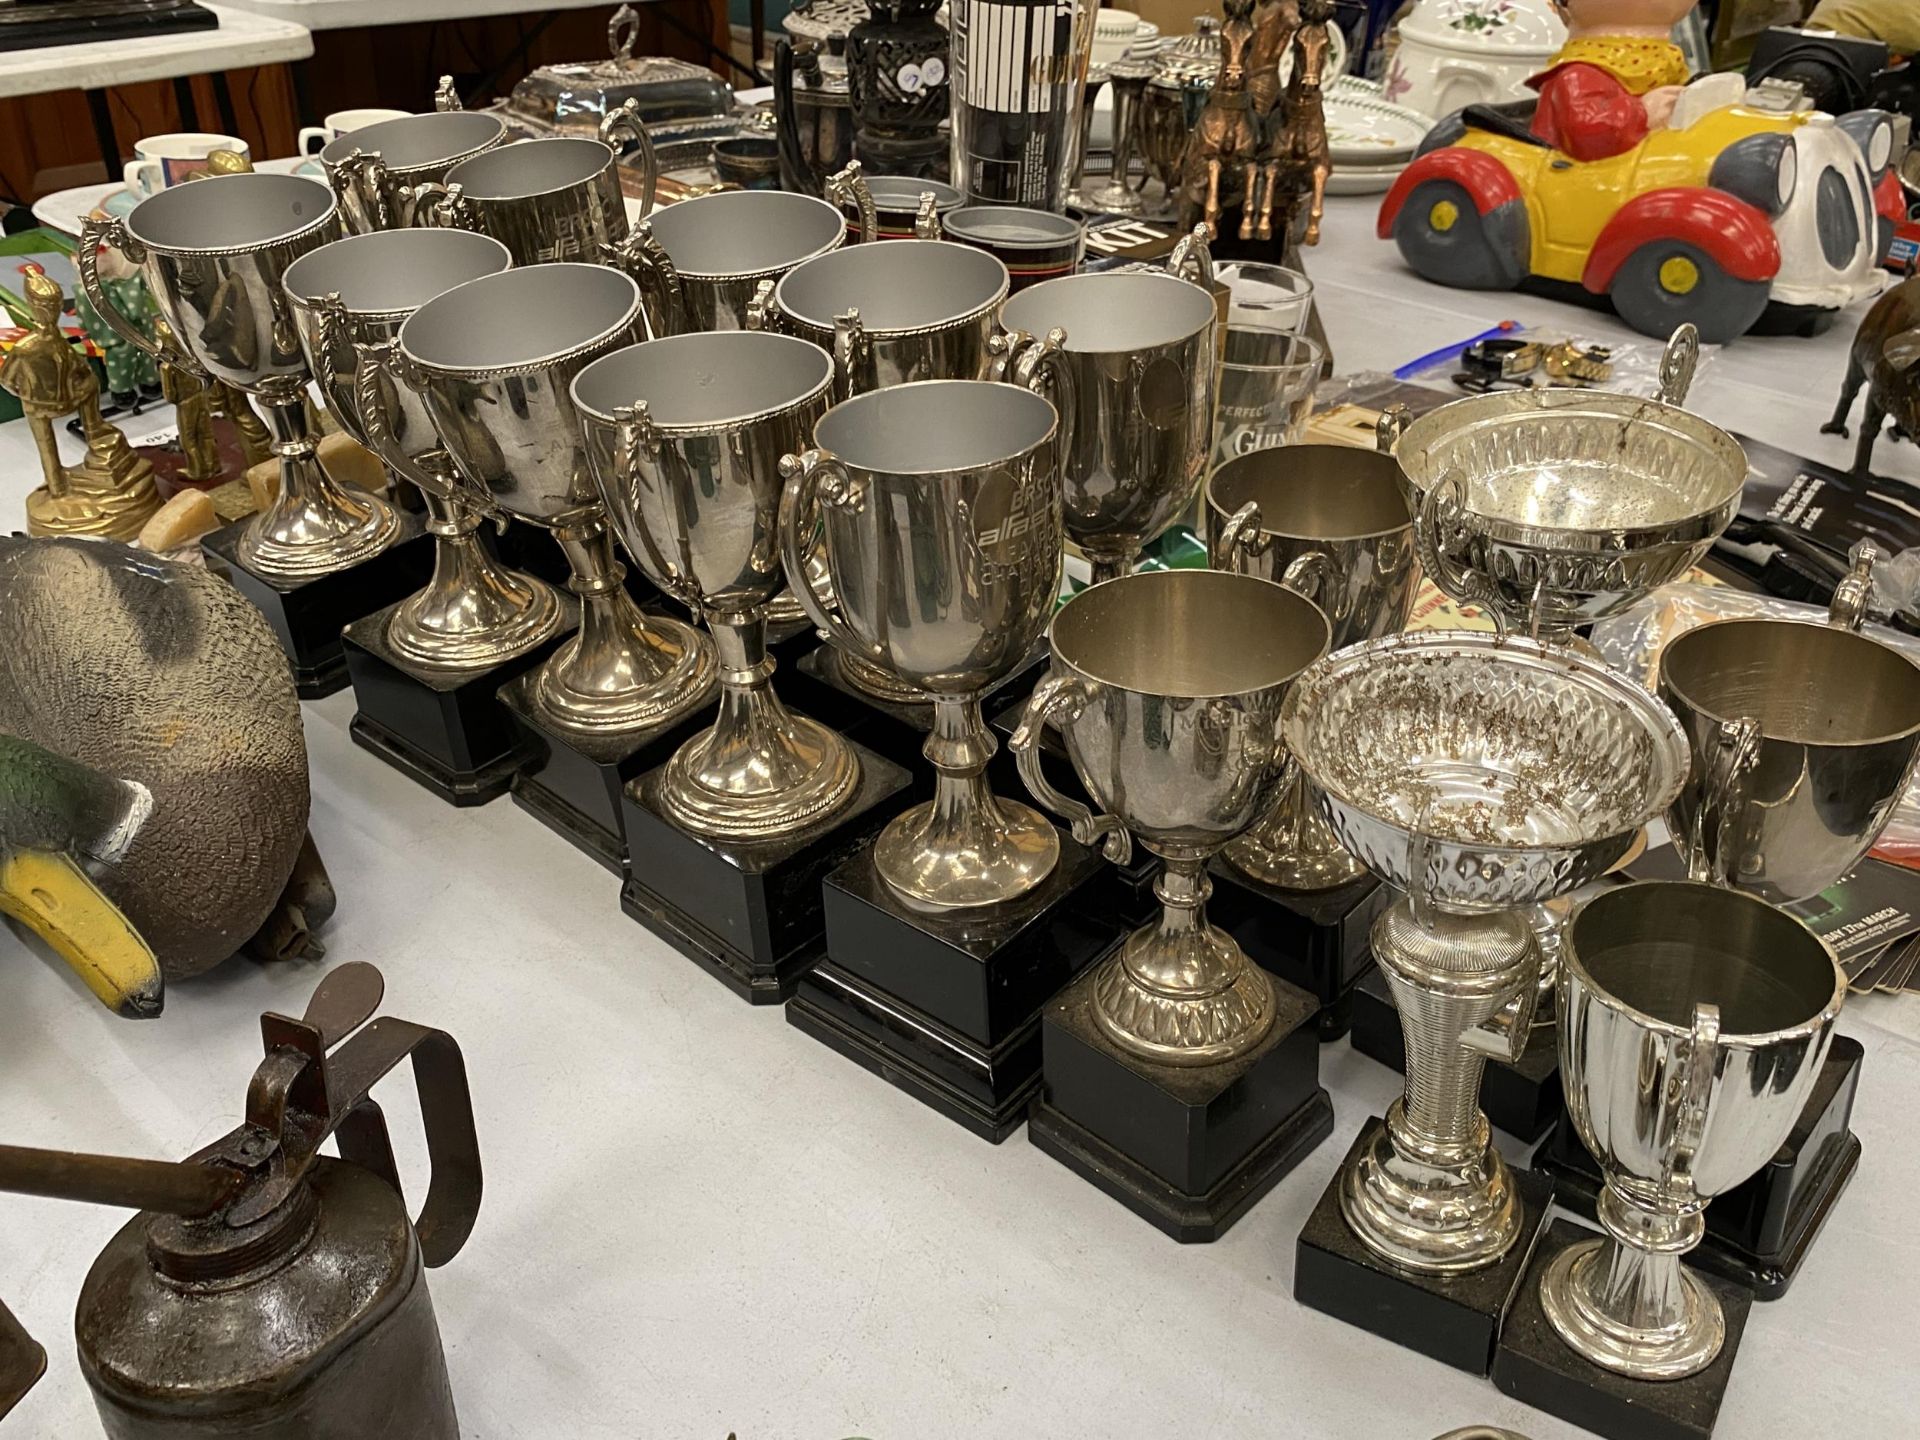 A LARGE COLLECTION OF CUPS AND TROPHIES - 16 IN TOTAL - Image 3 of 3